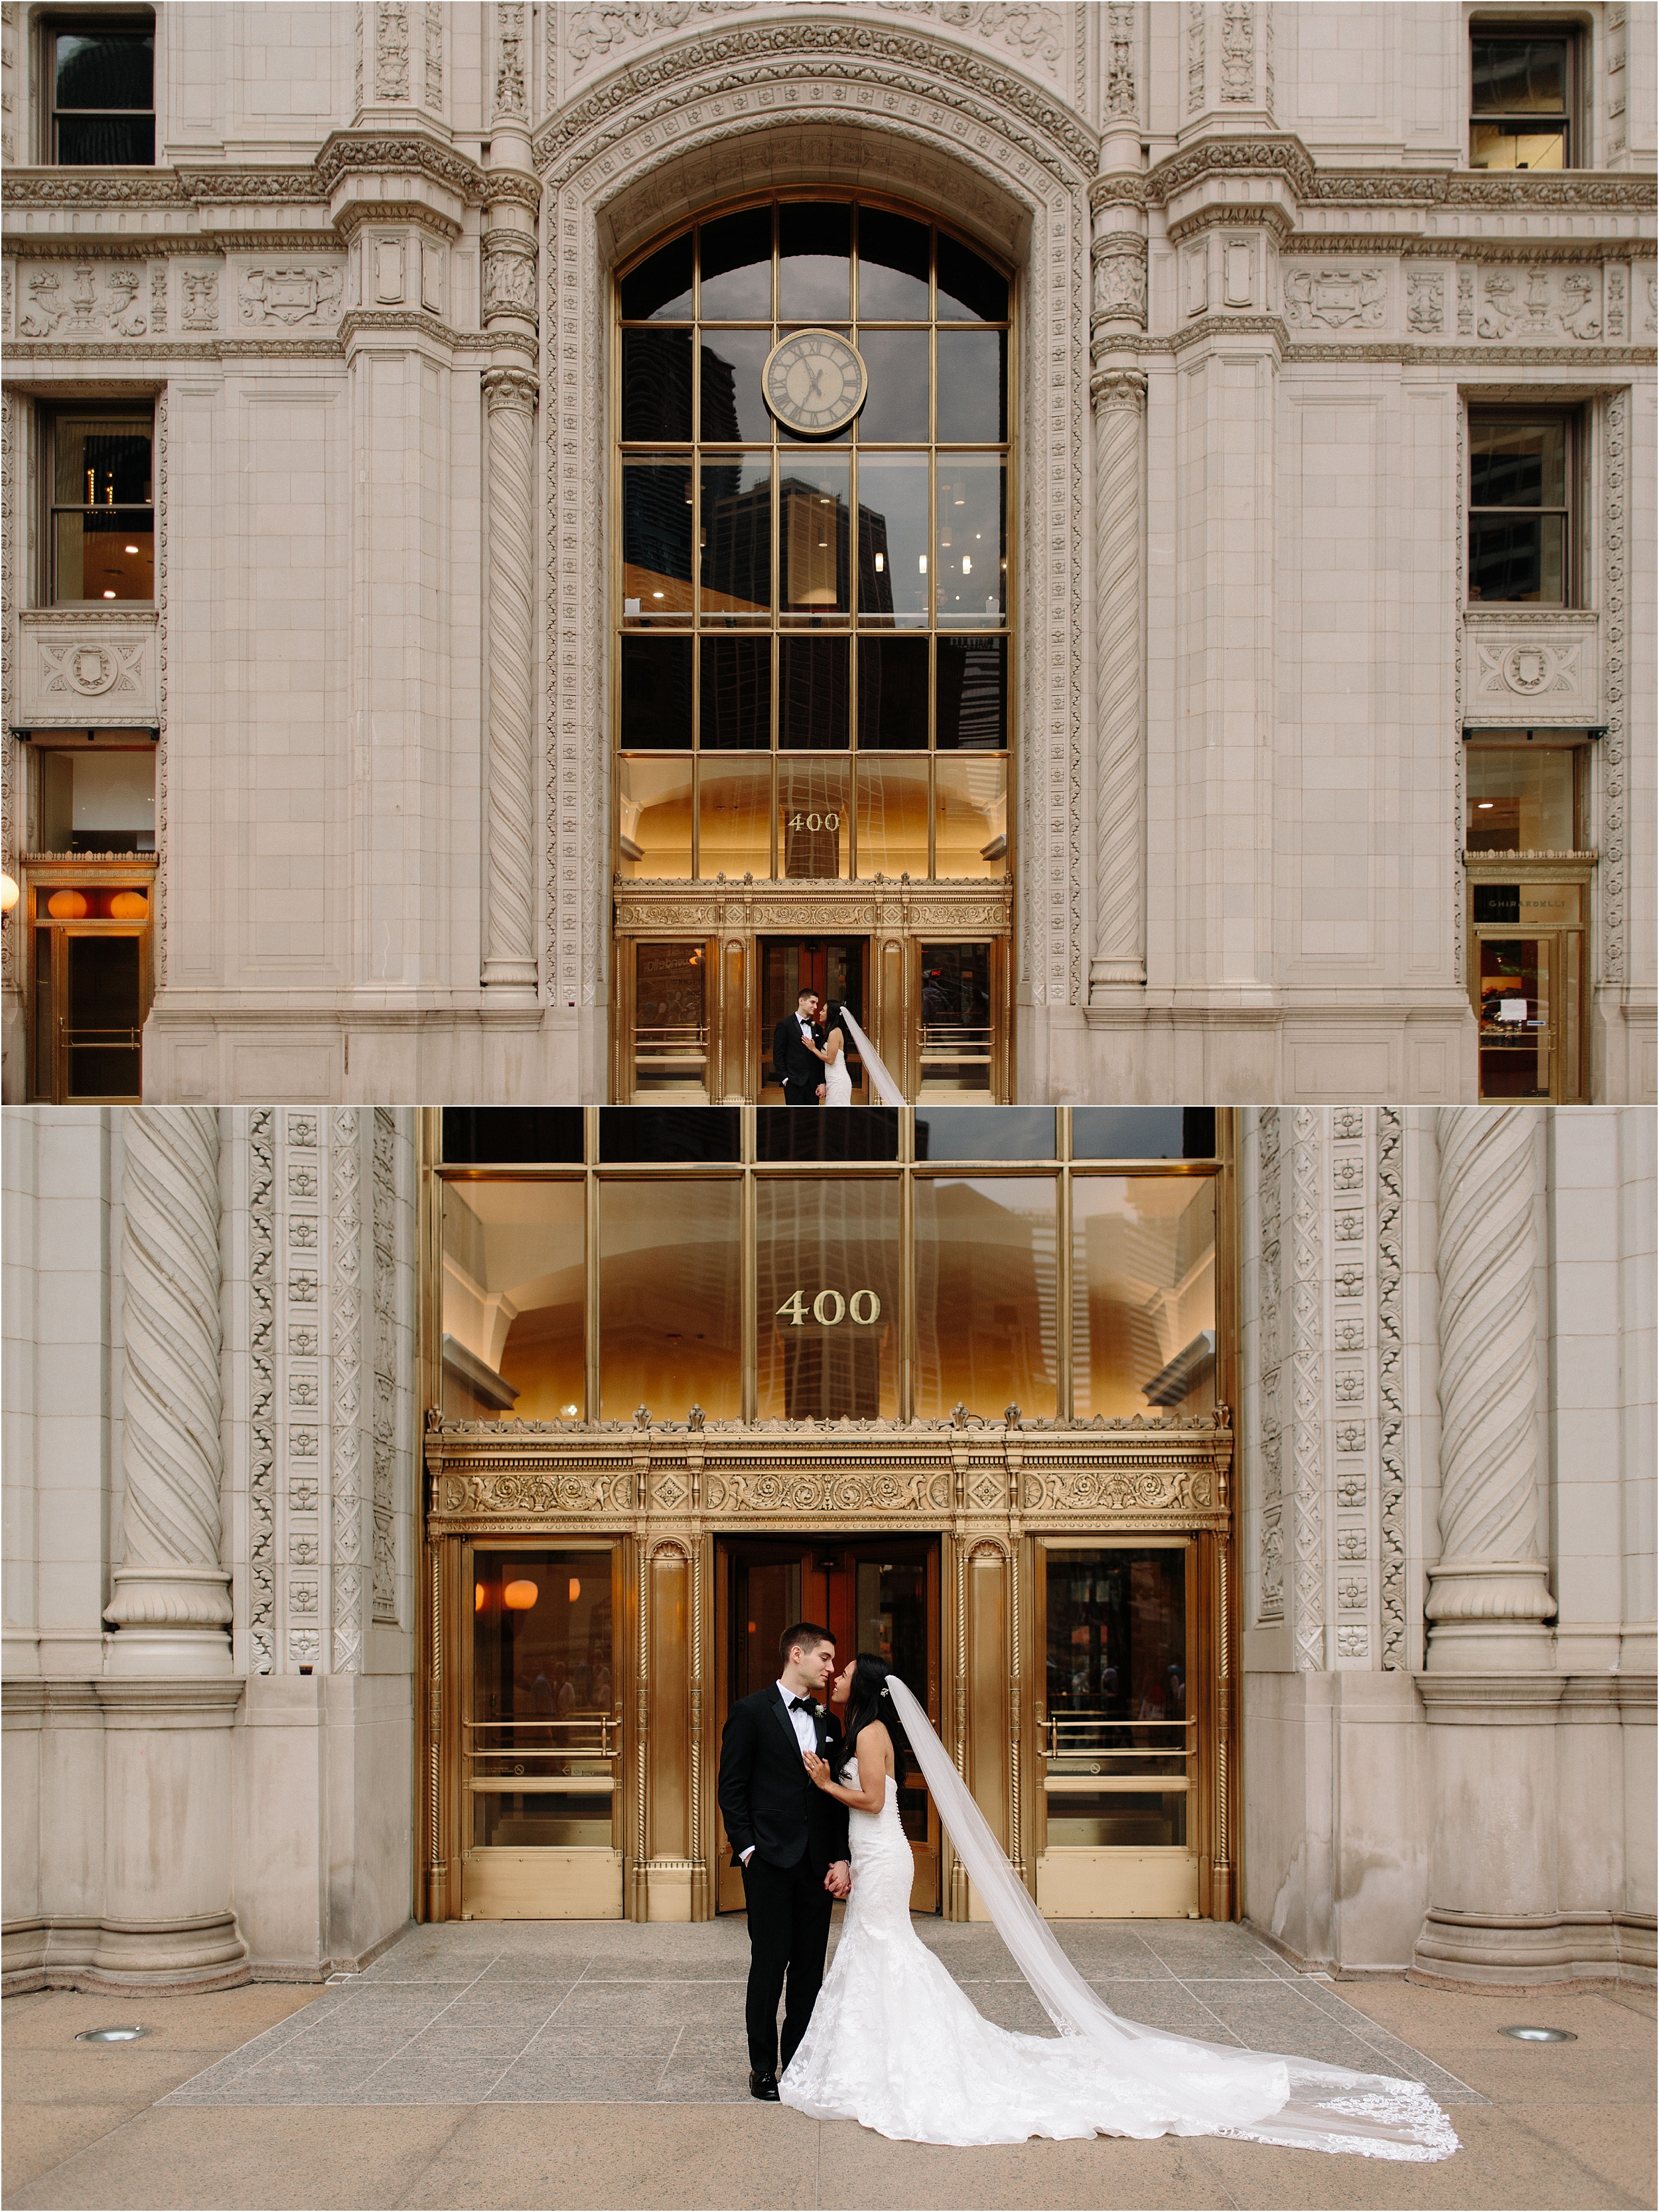 The Ivy Room Chicago Wedding